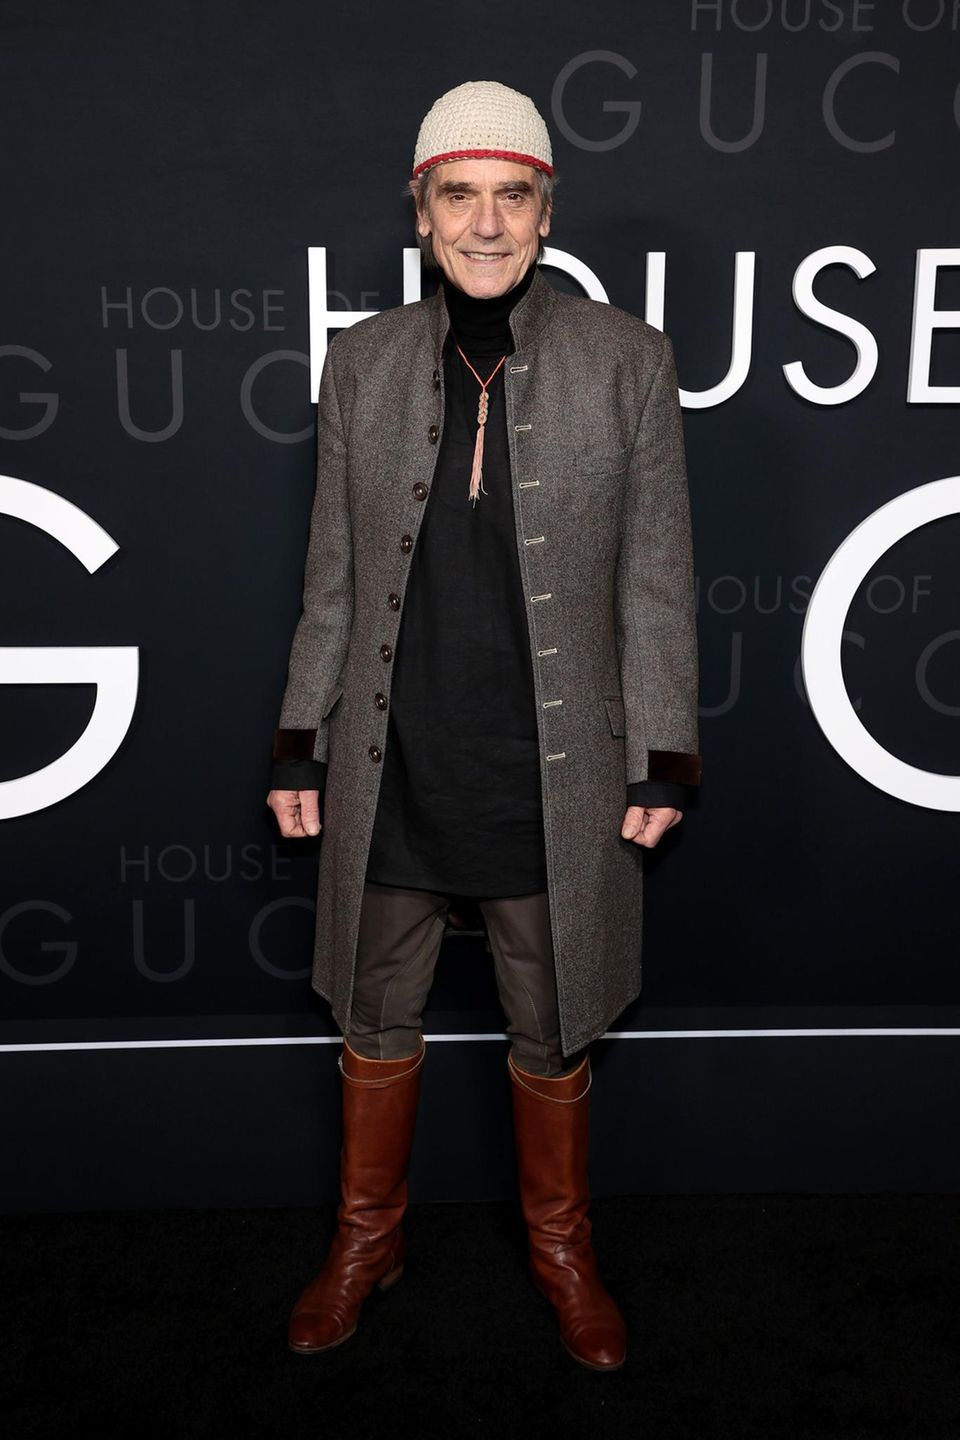 Die "House of Gucci" Premieren: Jeremy Irons in New York